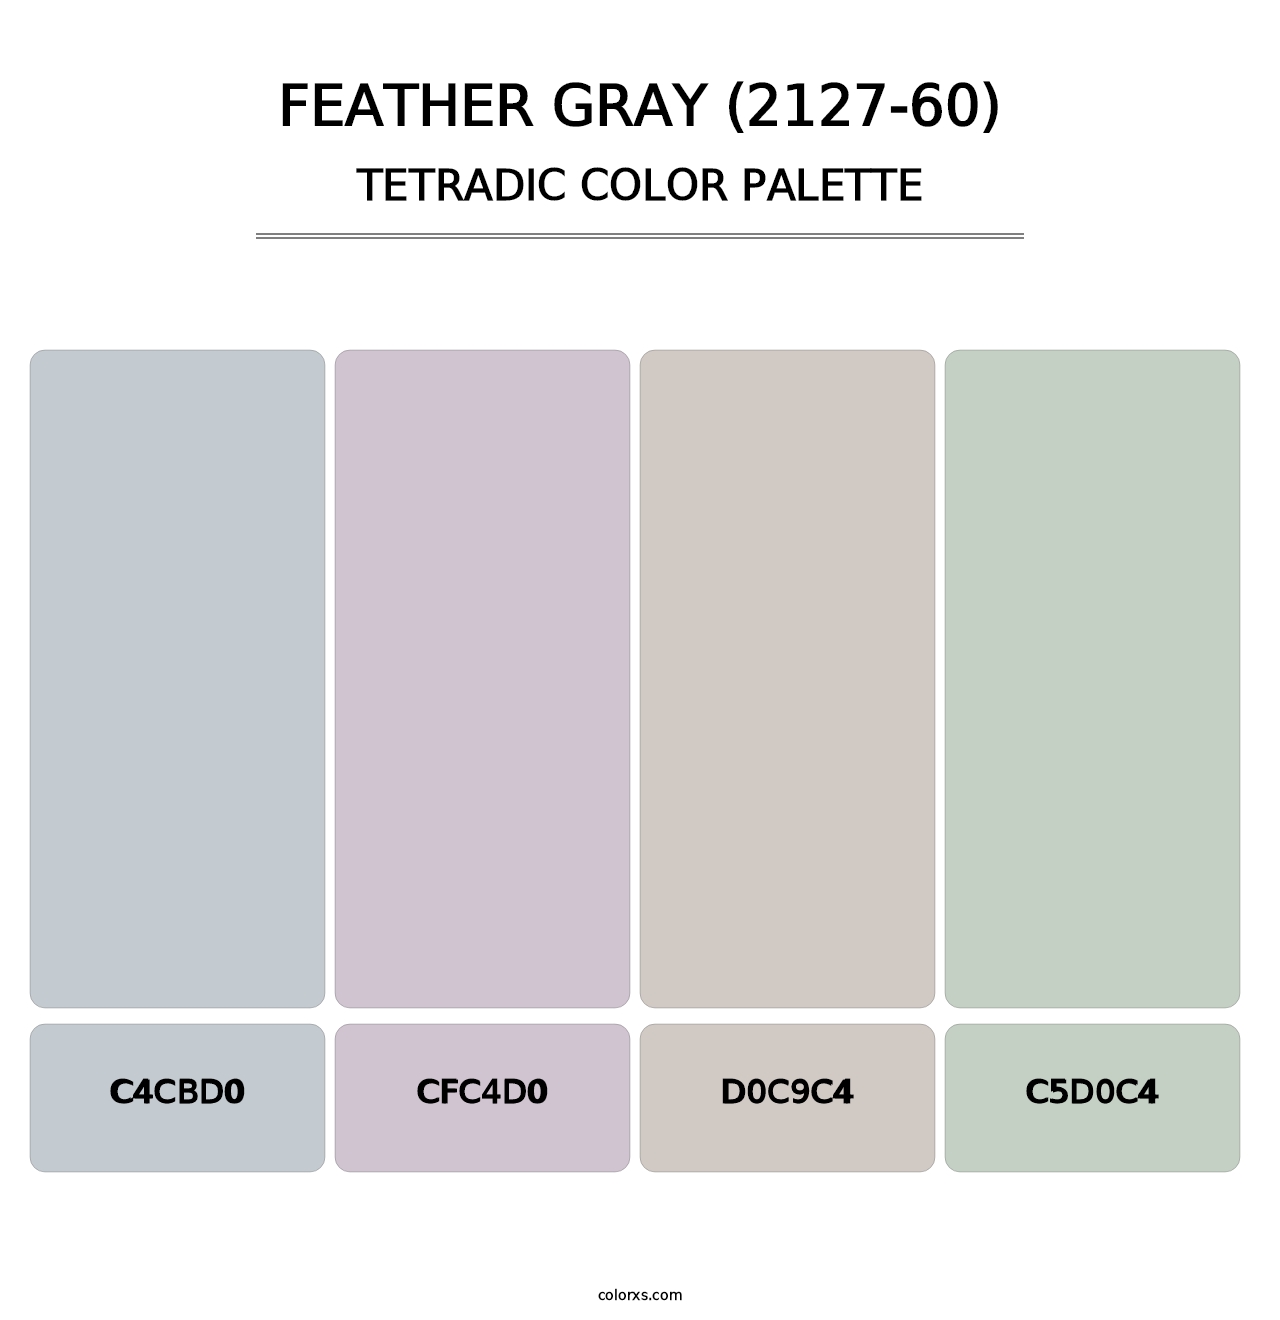 Feather Gray (2127-60) - Tetradic Color Palette